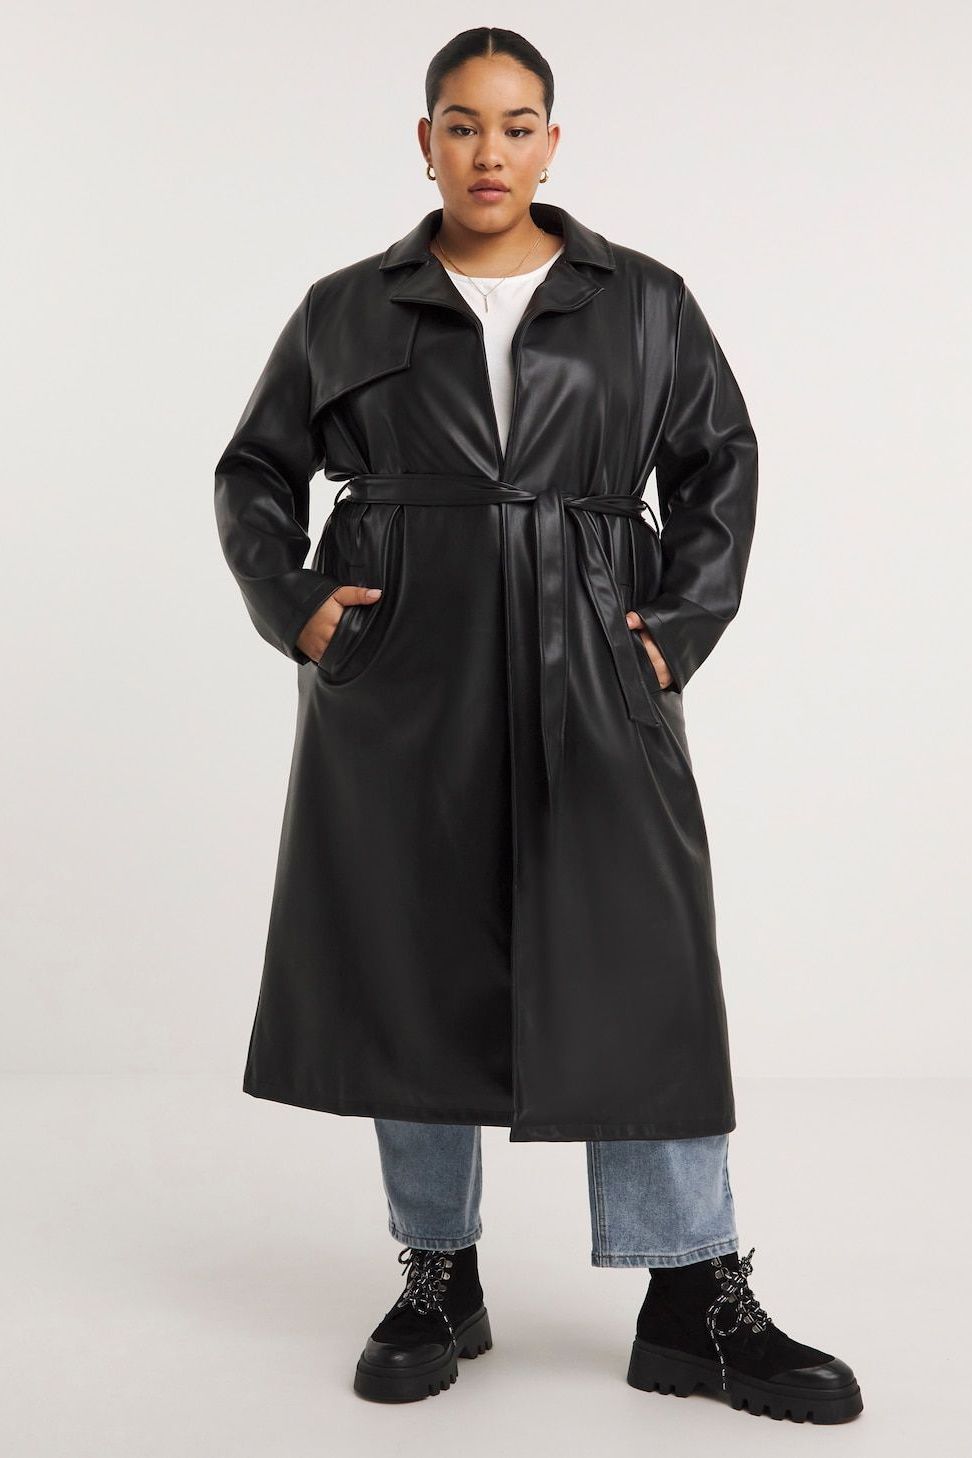 The Best Trench Coats for Women 2023: Reformation, Burberry, Nobis